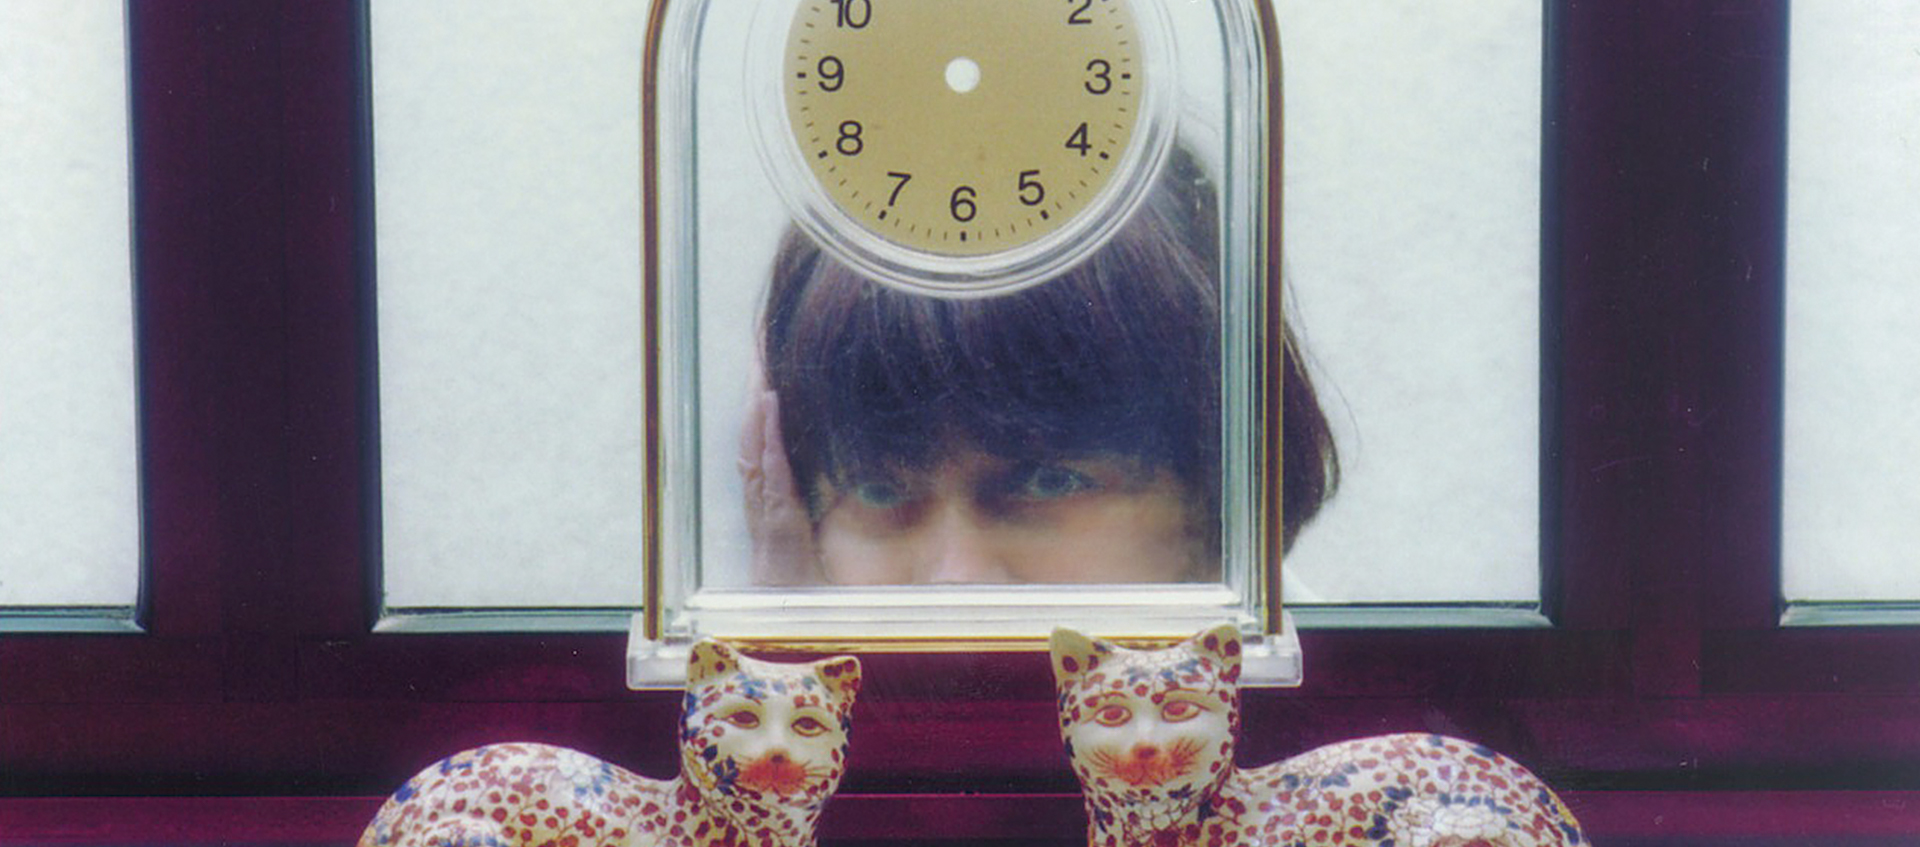 Filmmaker Agnés Varda seen from the cheeks up, standing behind a glass table clock and two decorative ceramic cats